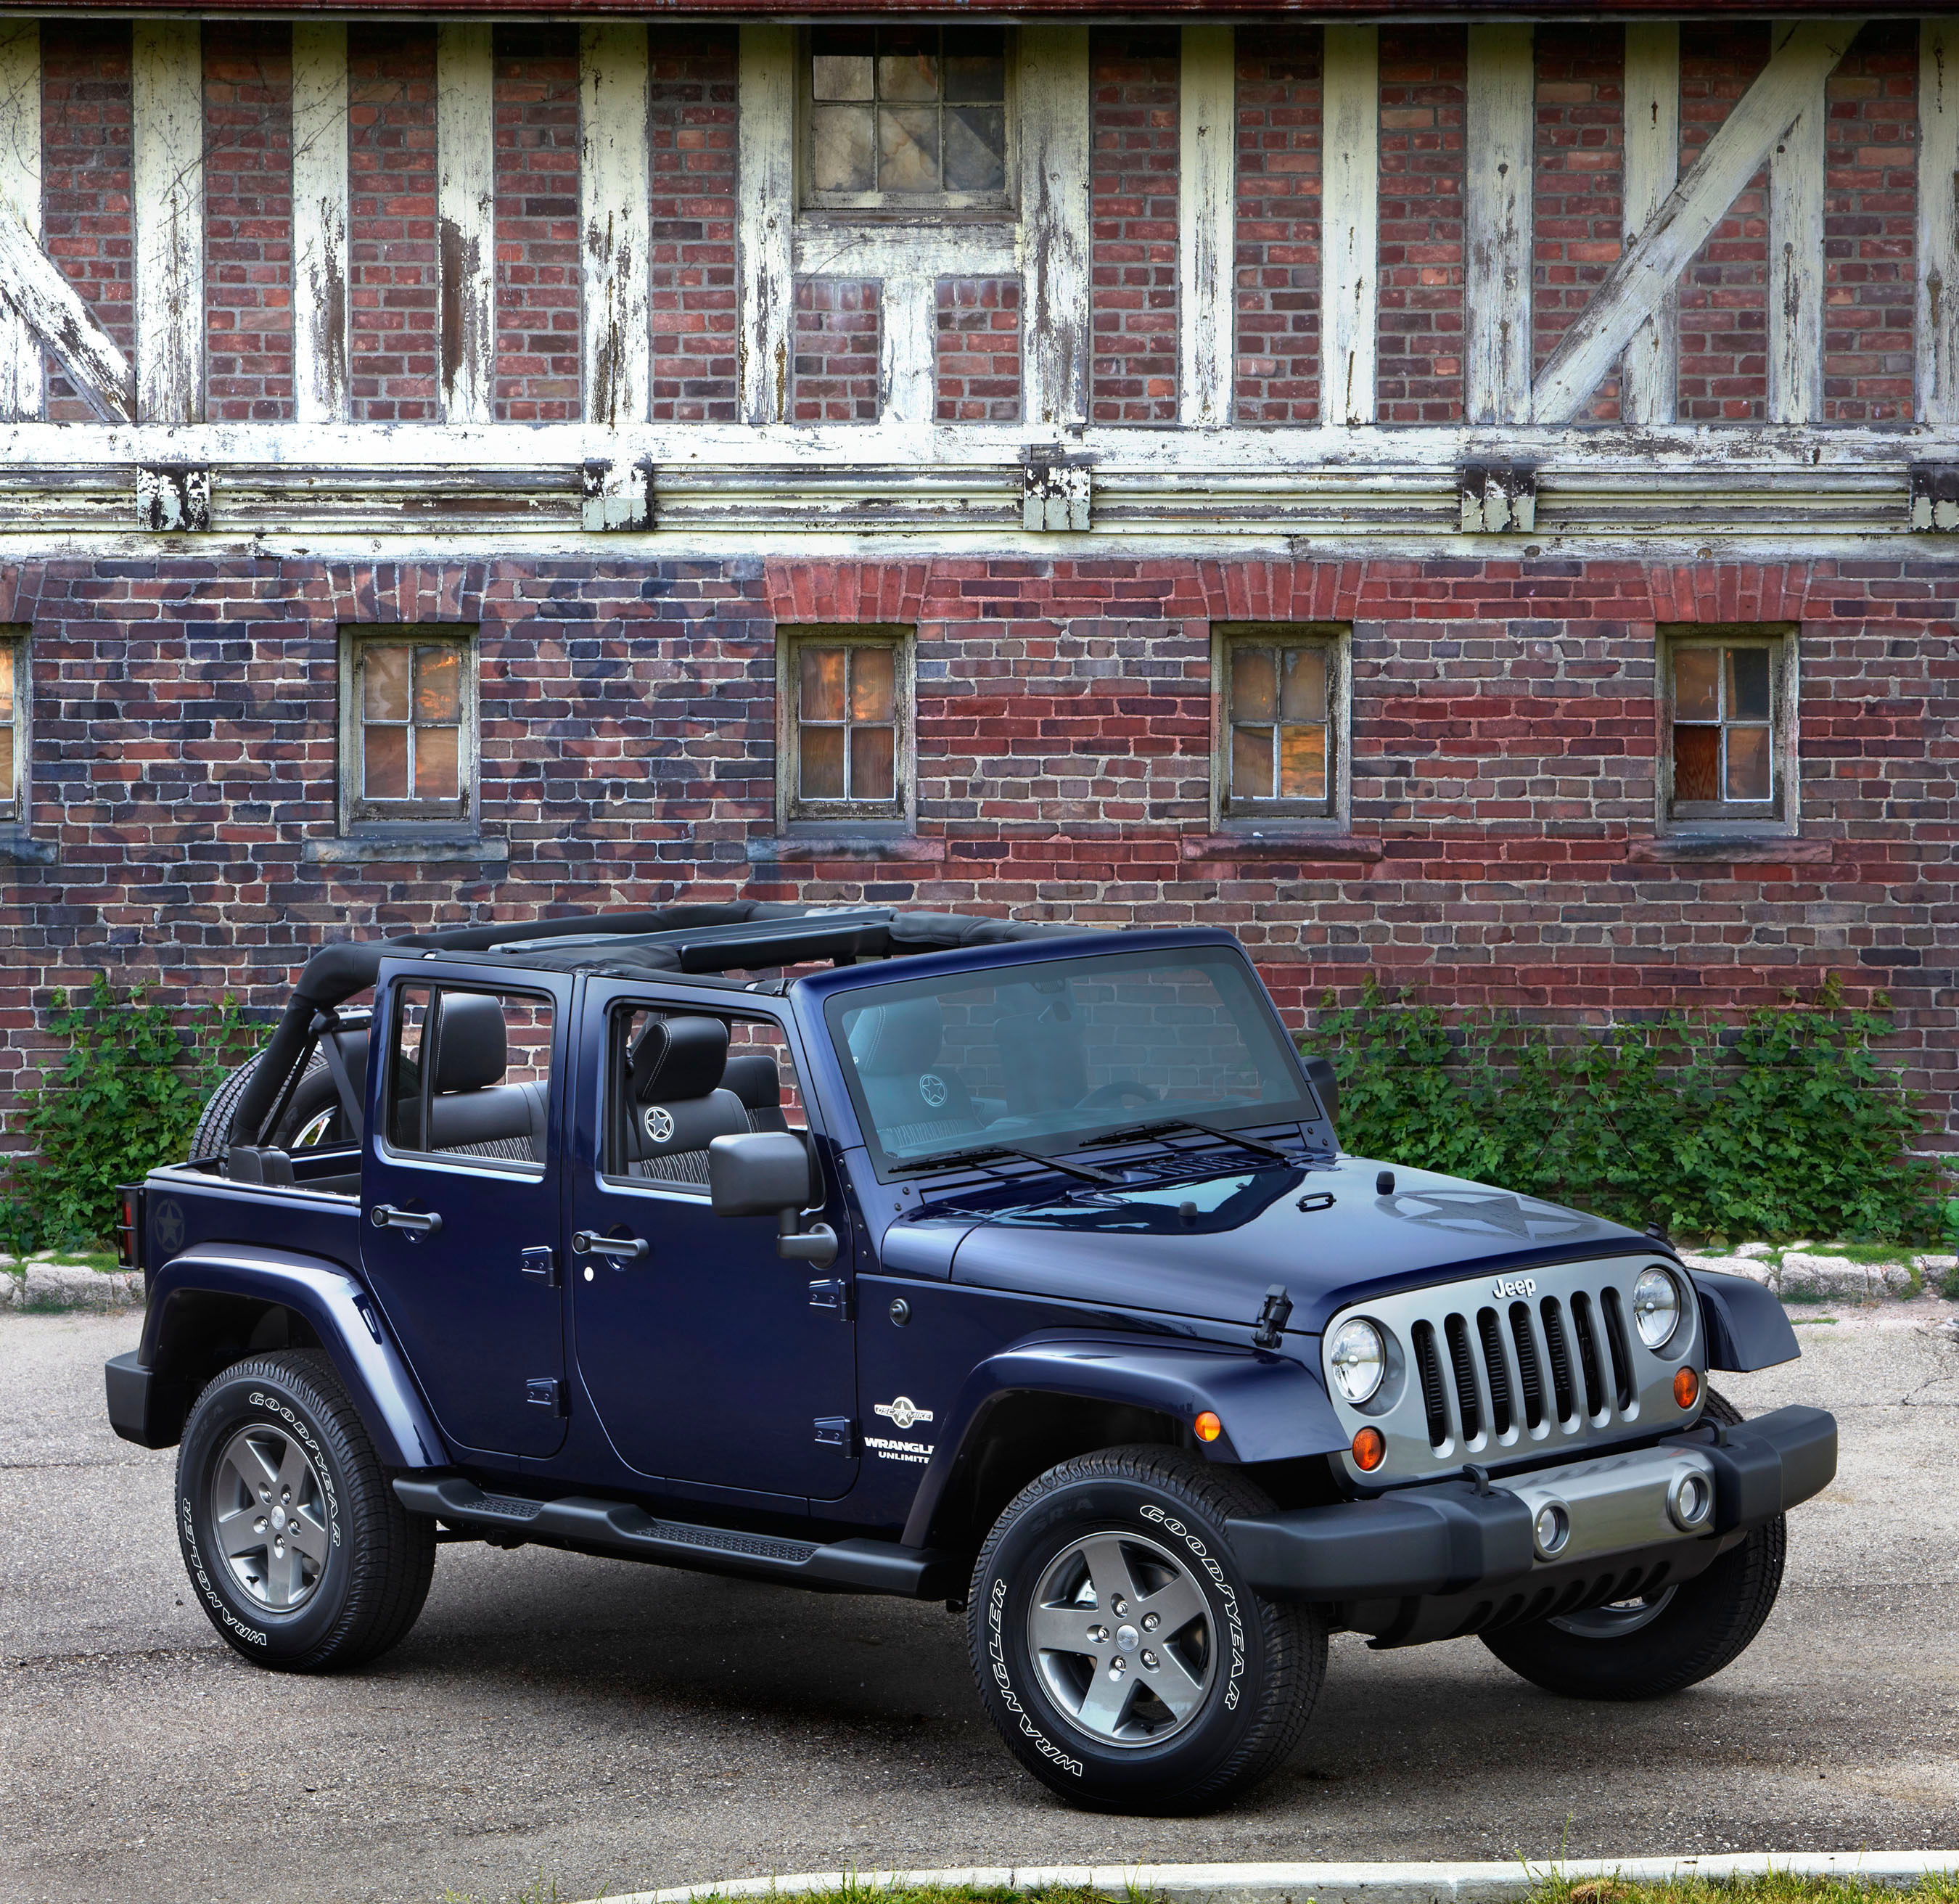 New 2012 Jeep® Wrangler Freedom Edition Debuts as Tribute to . Military  Members